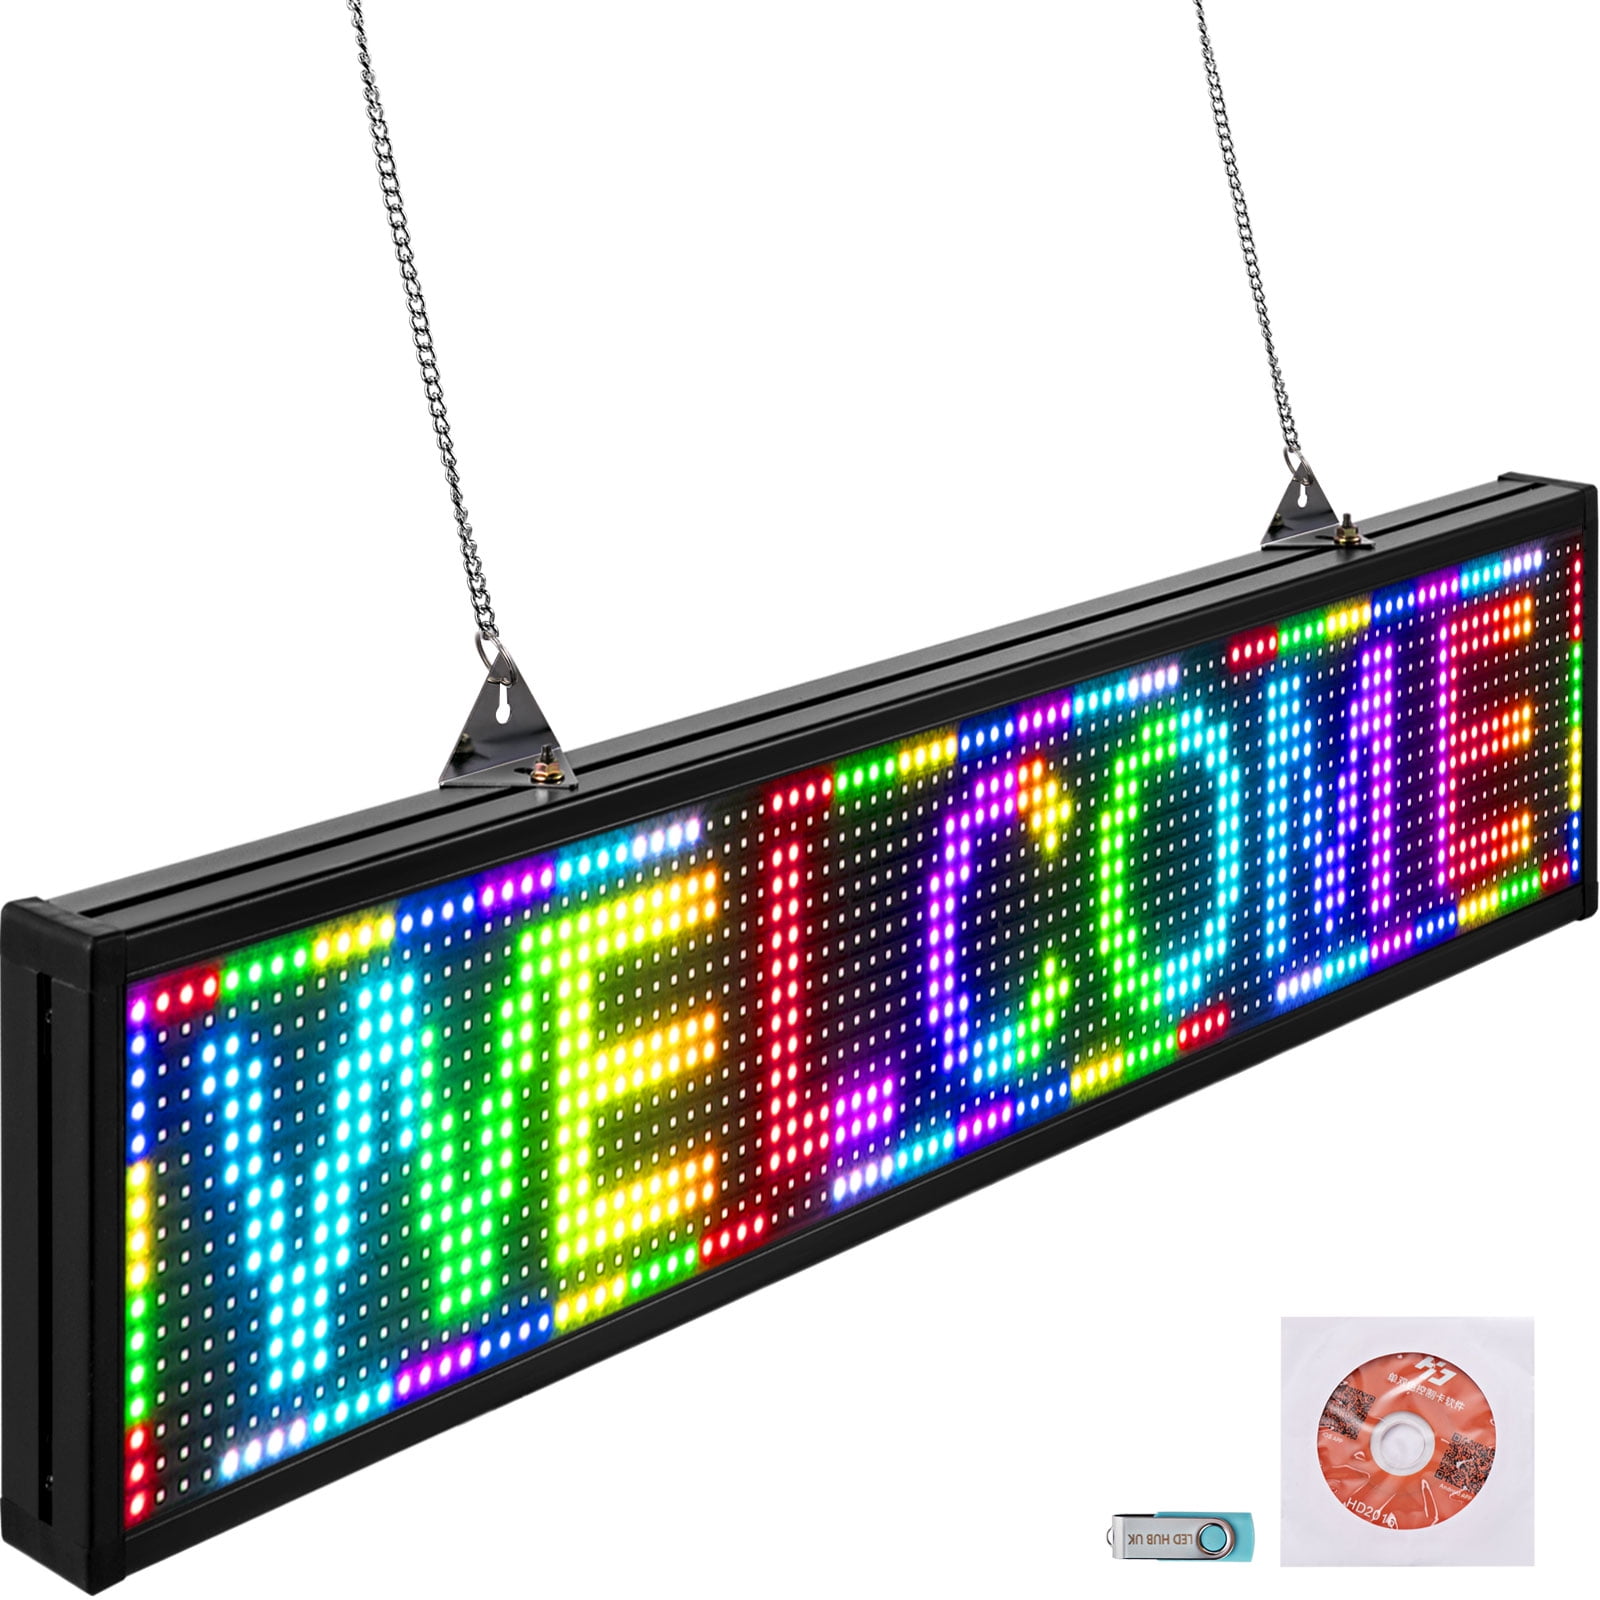 VEVOR Led Sign 38 x 6.5 Digital Sign 96 x 16 HD Resolution Full Color P10  Indoor Led Message Board Digital Display Board Electronic Scrolling Led Sign  Programmable by PC  Wi-Fi